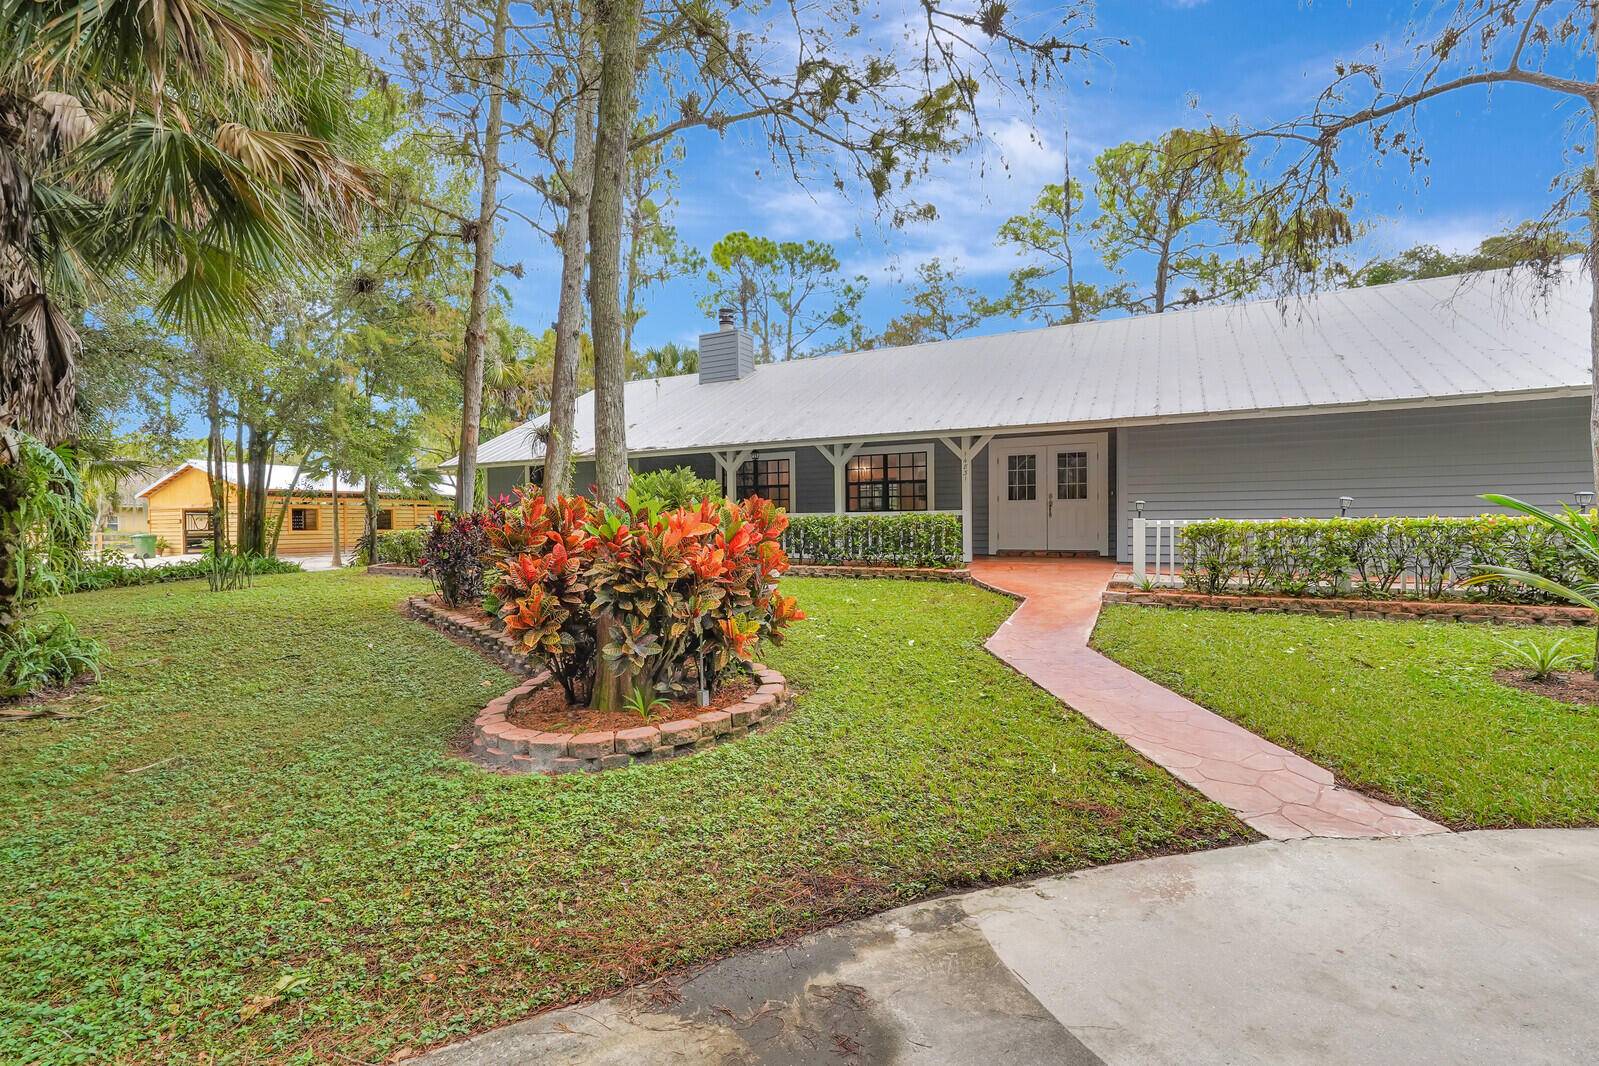 Experience the ultimate equestrian retreat with this turnkey Farm.